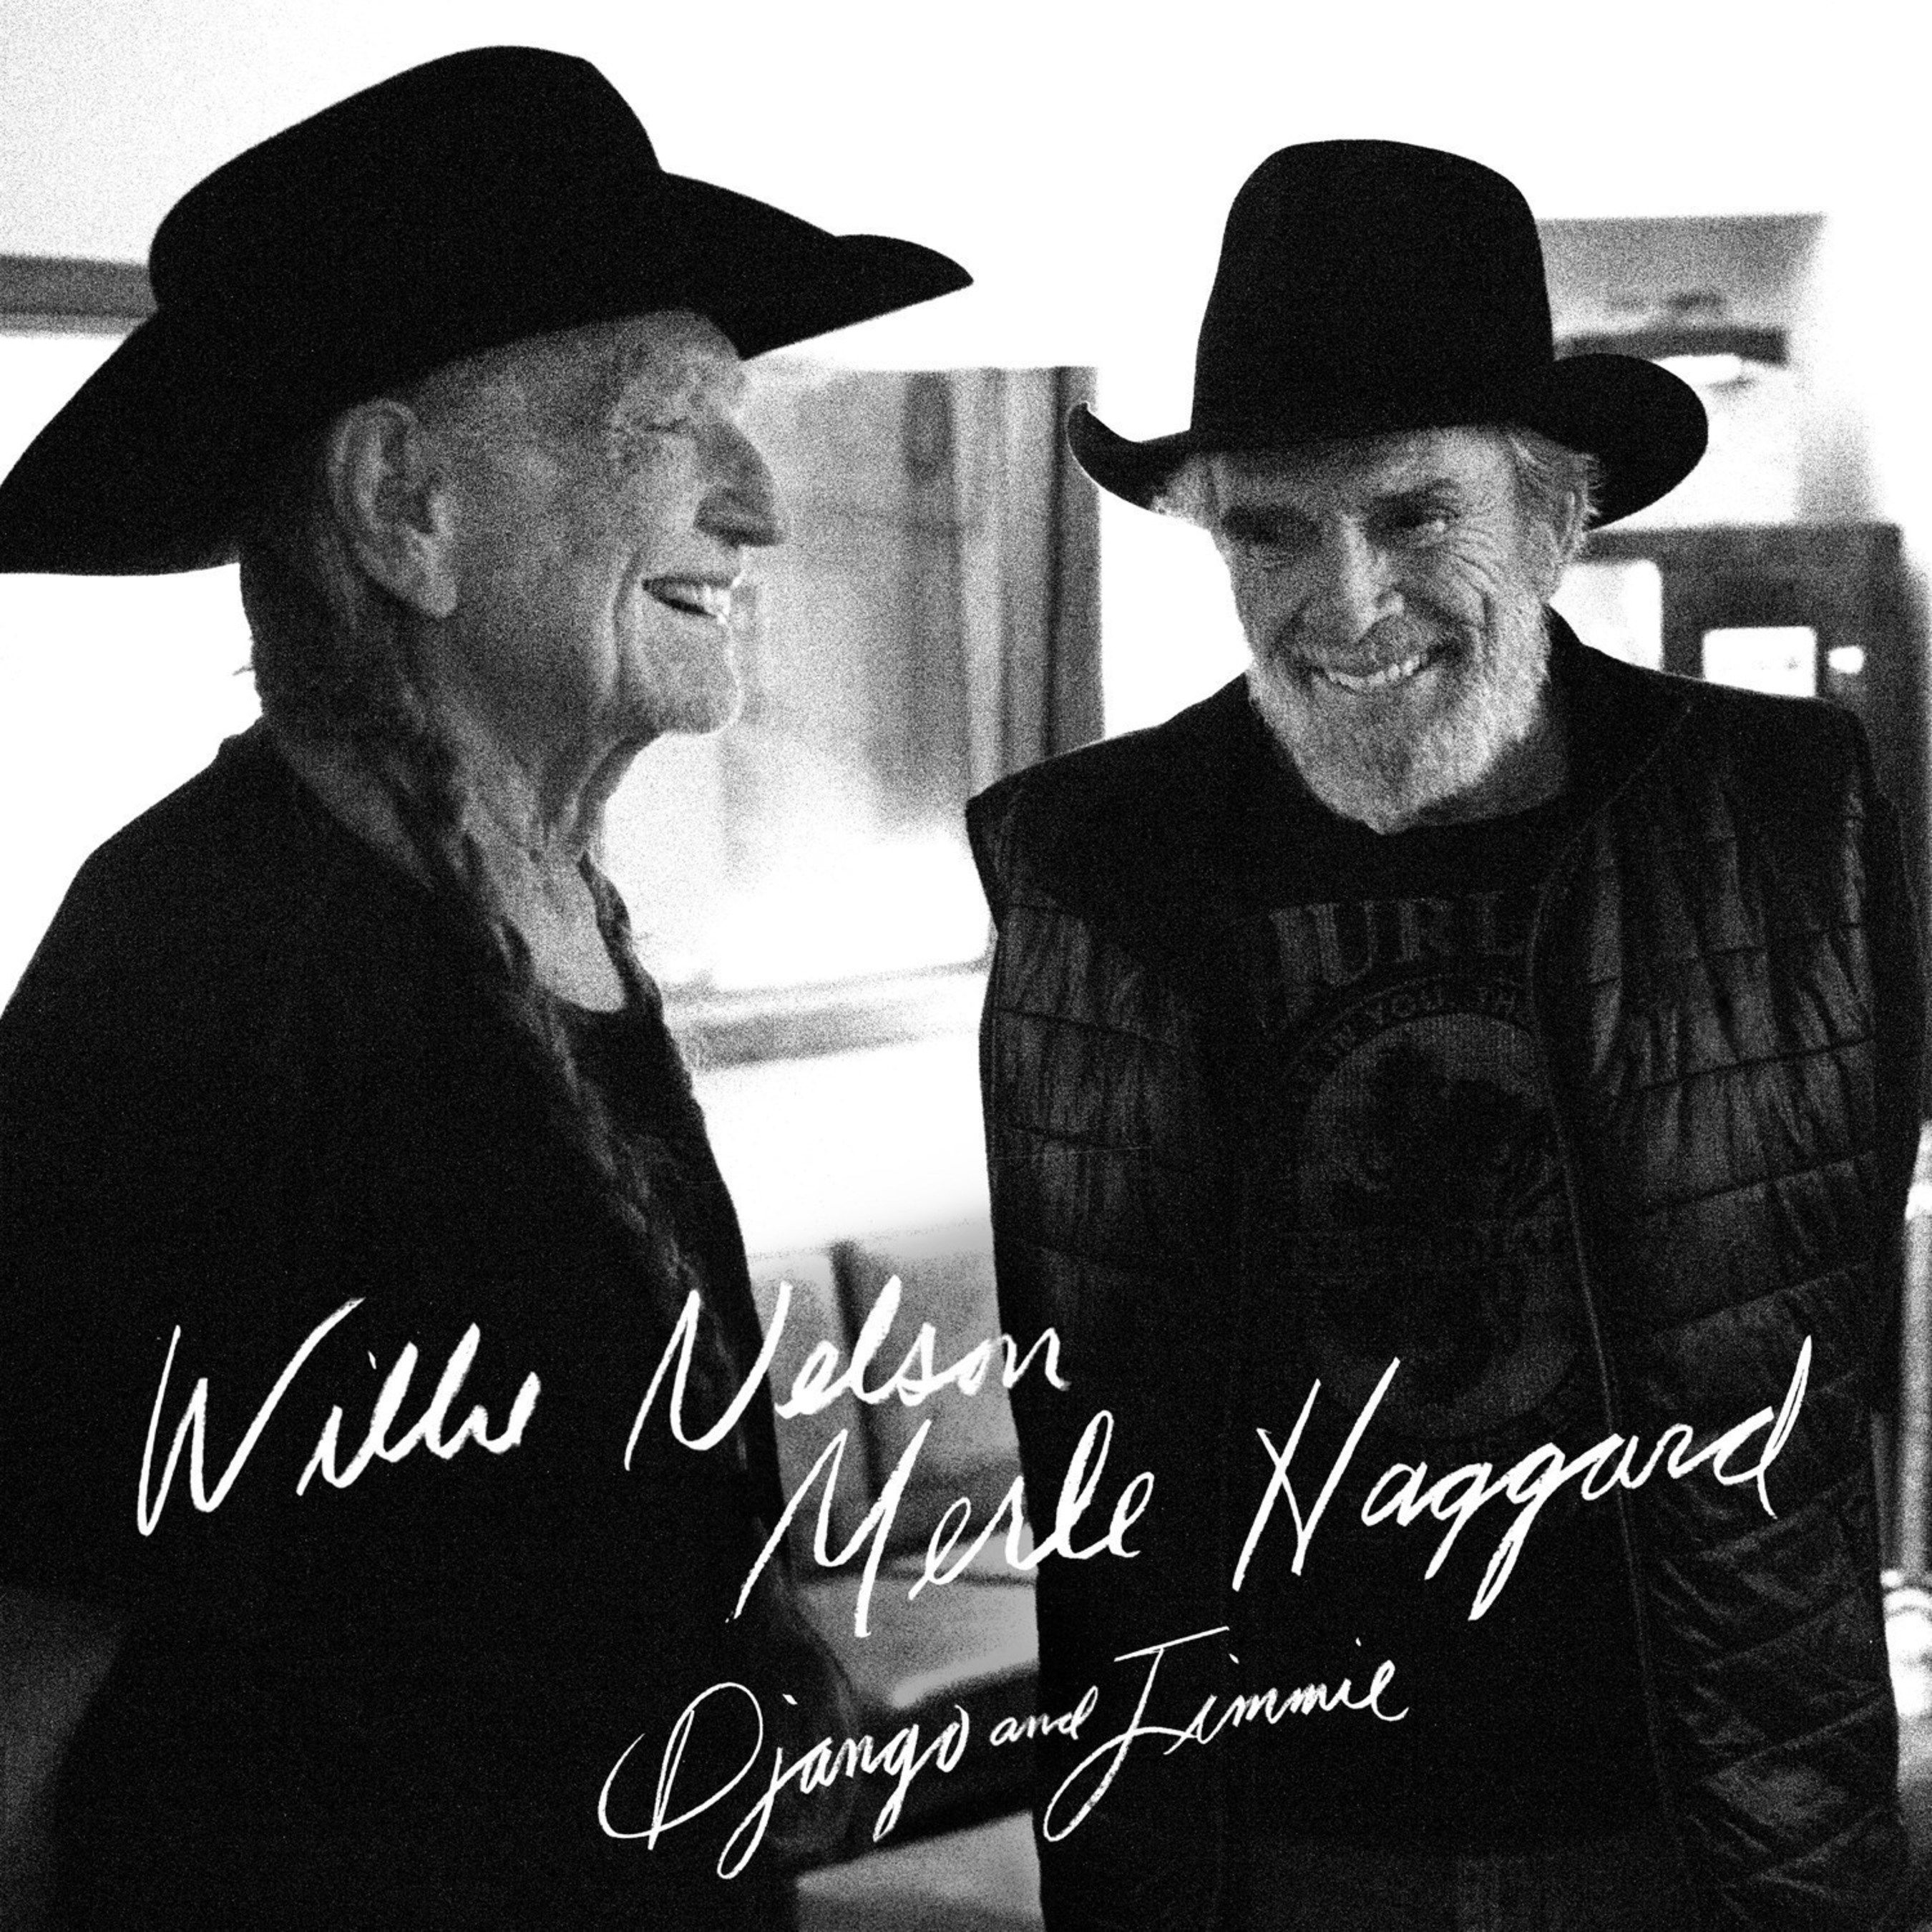 Legacy Recordings is proud to announce the June 2 release of Django and Jimmie, the new studio album collaboration from Willie Nelson and Merle Haggard, two of the founding fathers of American outlaw country music.